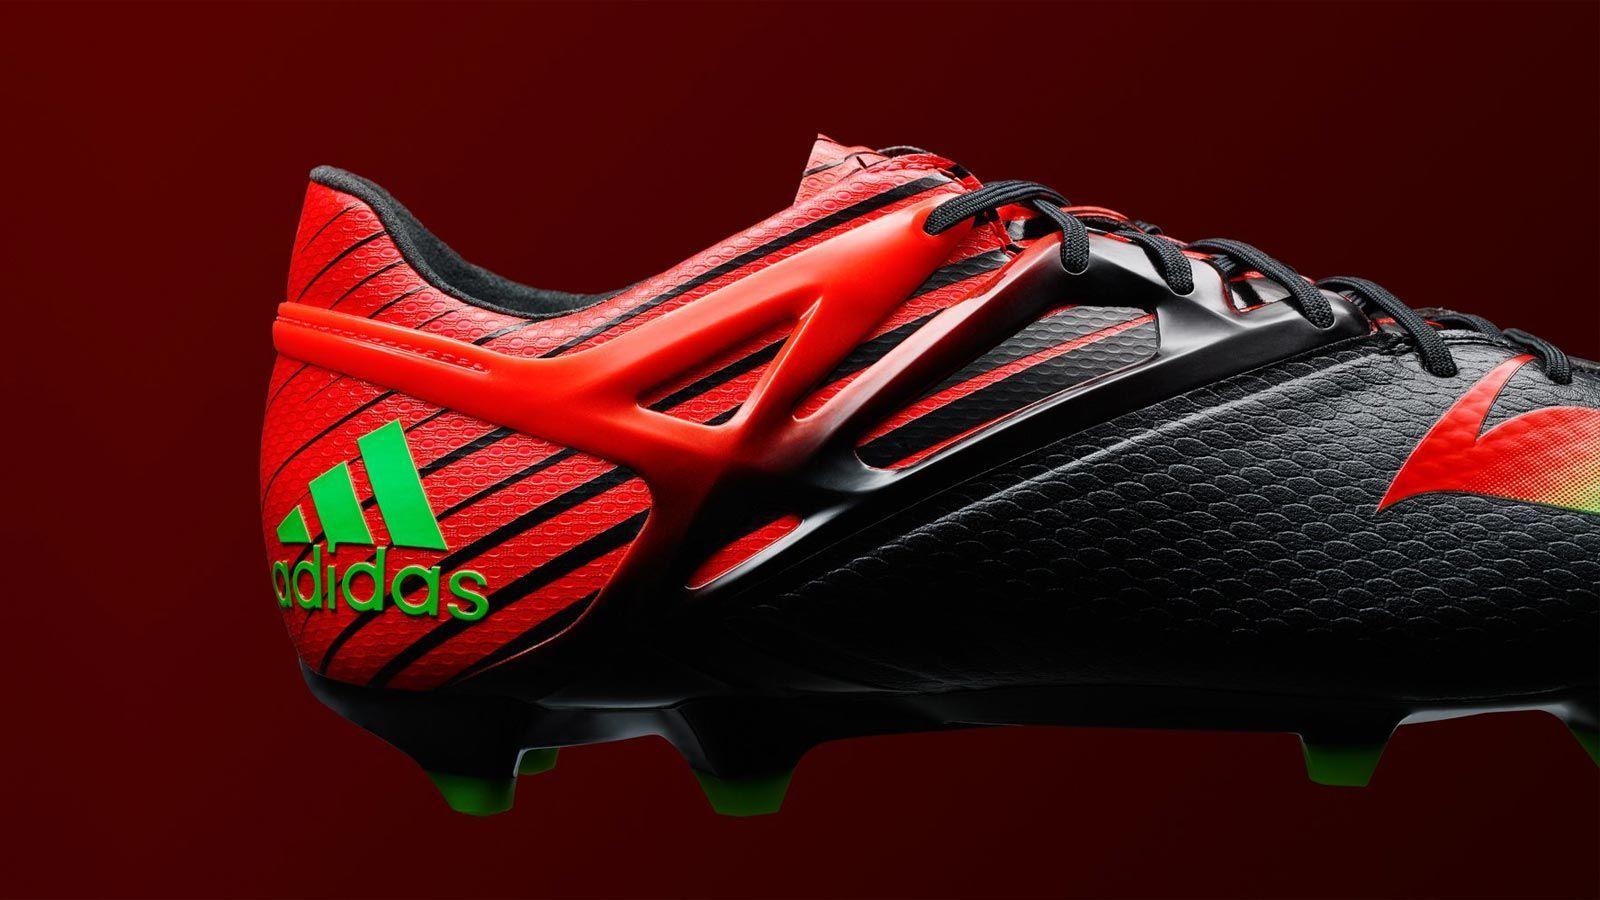 The New Black / Red Adidas Messi 2015 2016 Football Boot Features An